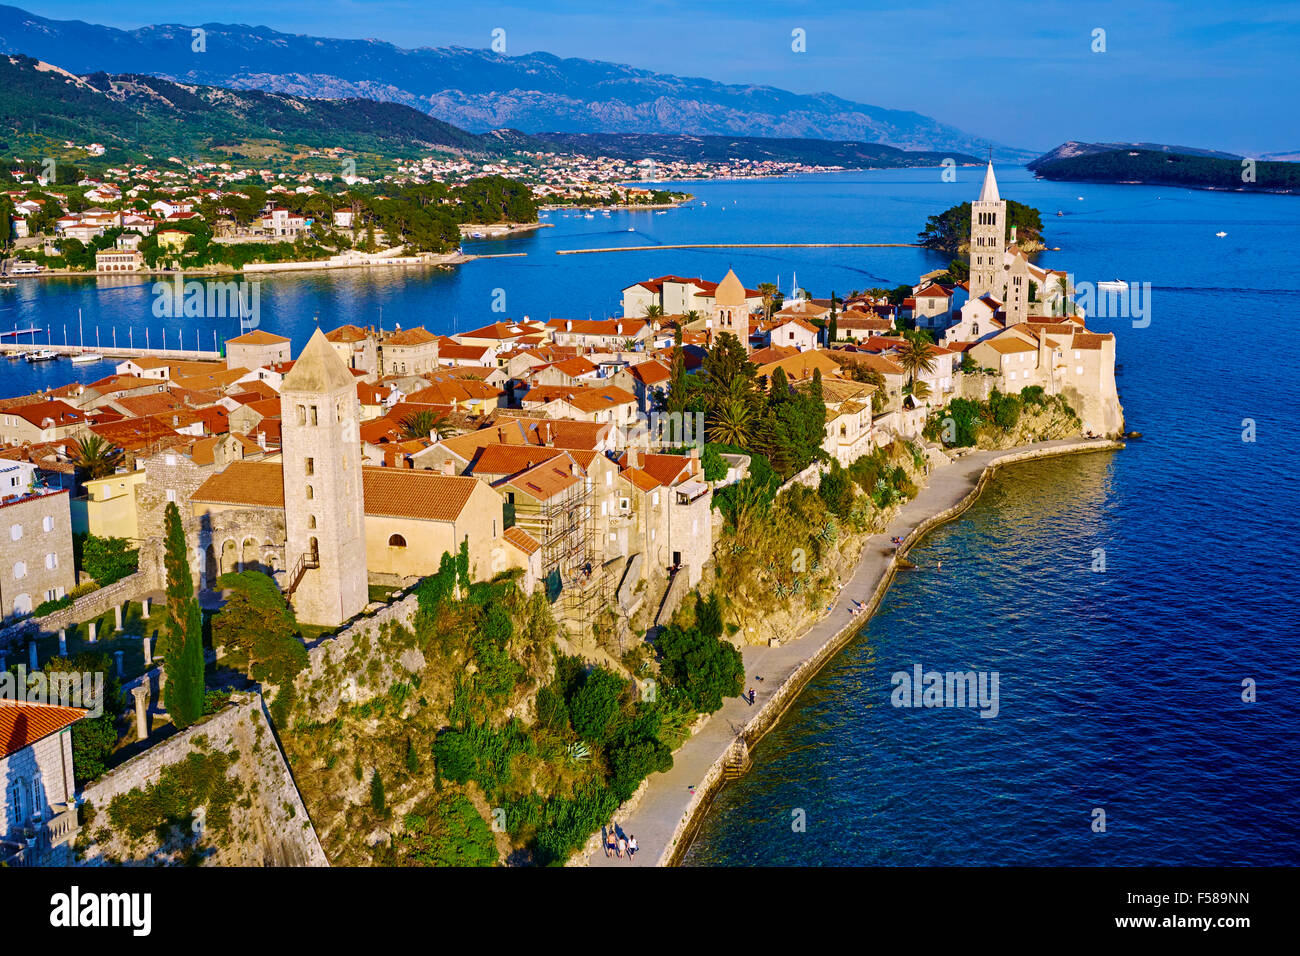 Croatia, Kvarner bay, island and city of Rab, succession of bell towers Stock Photo